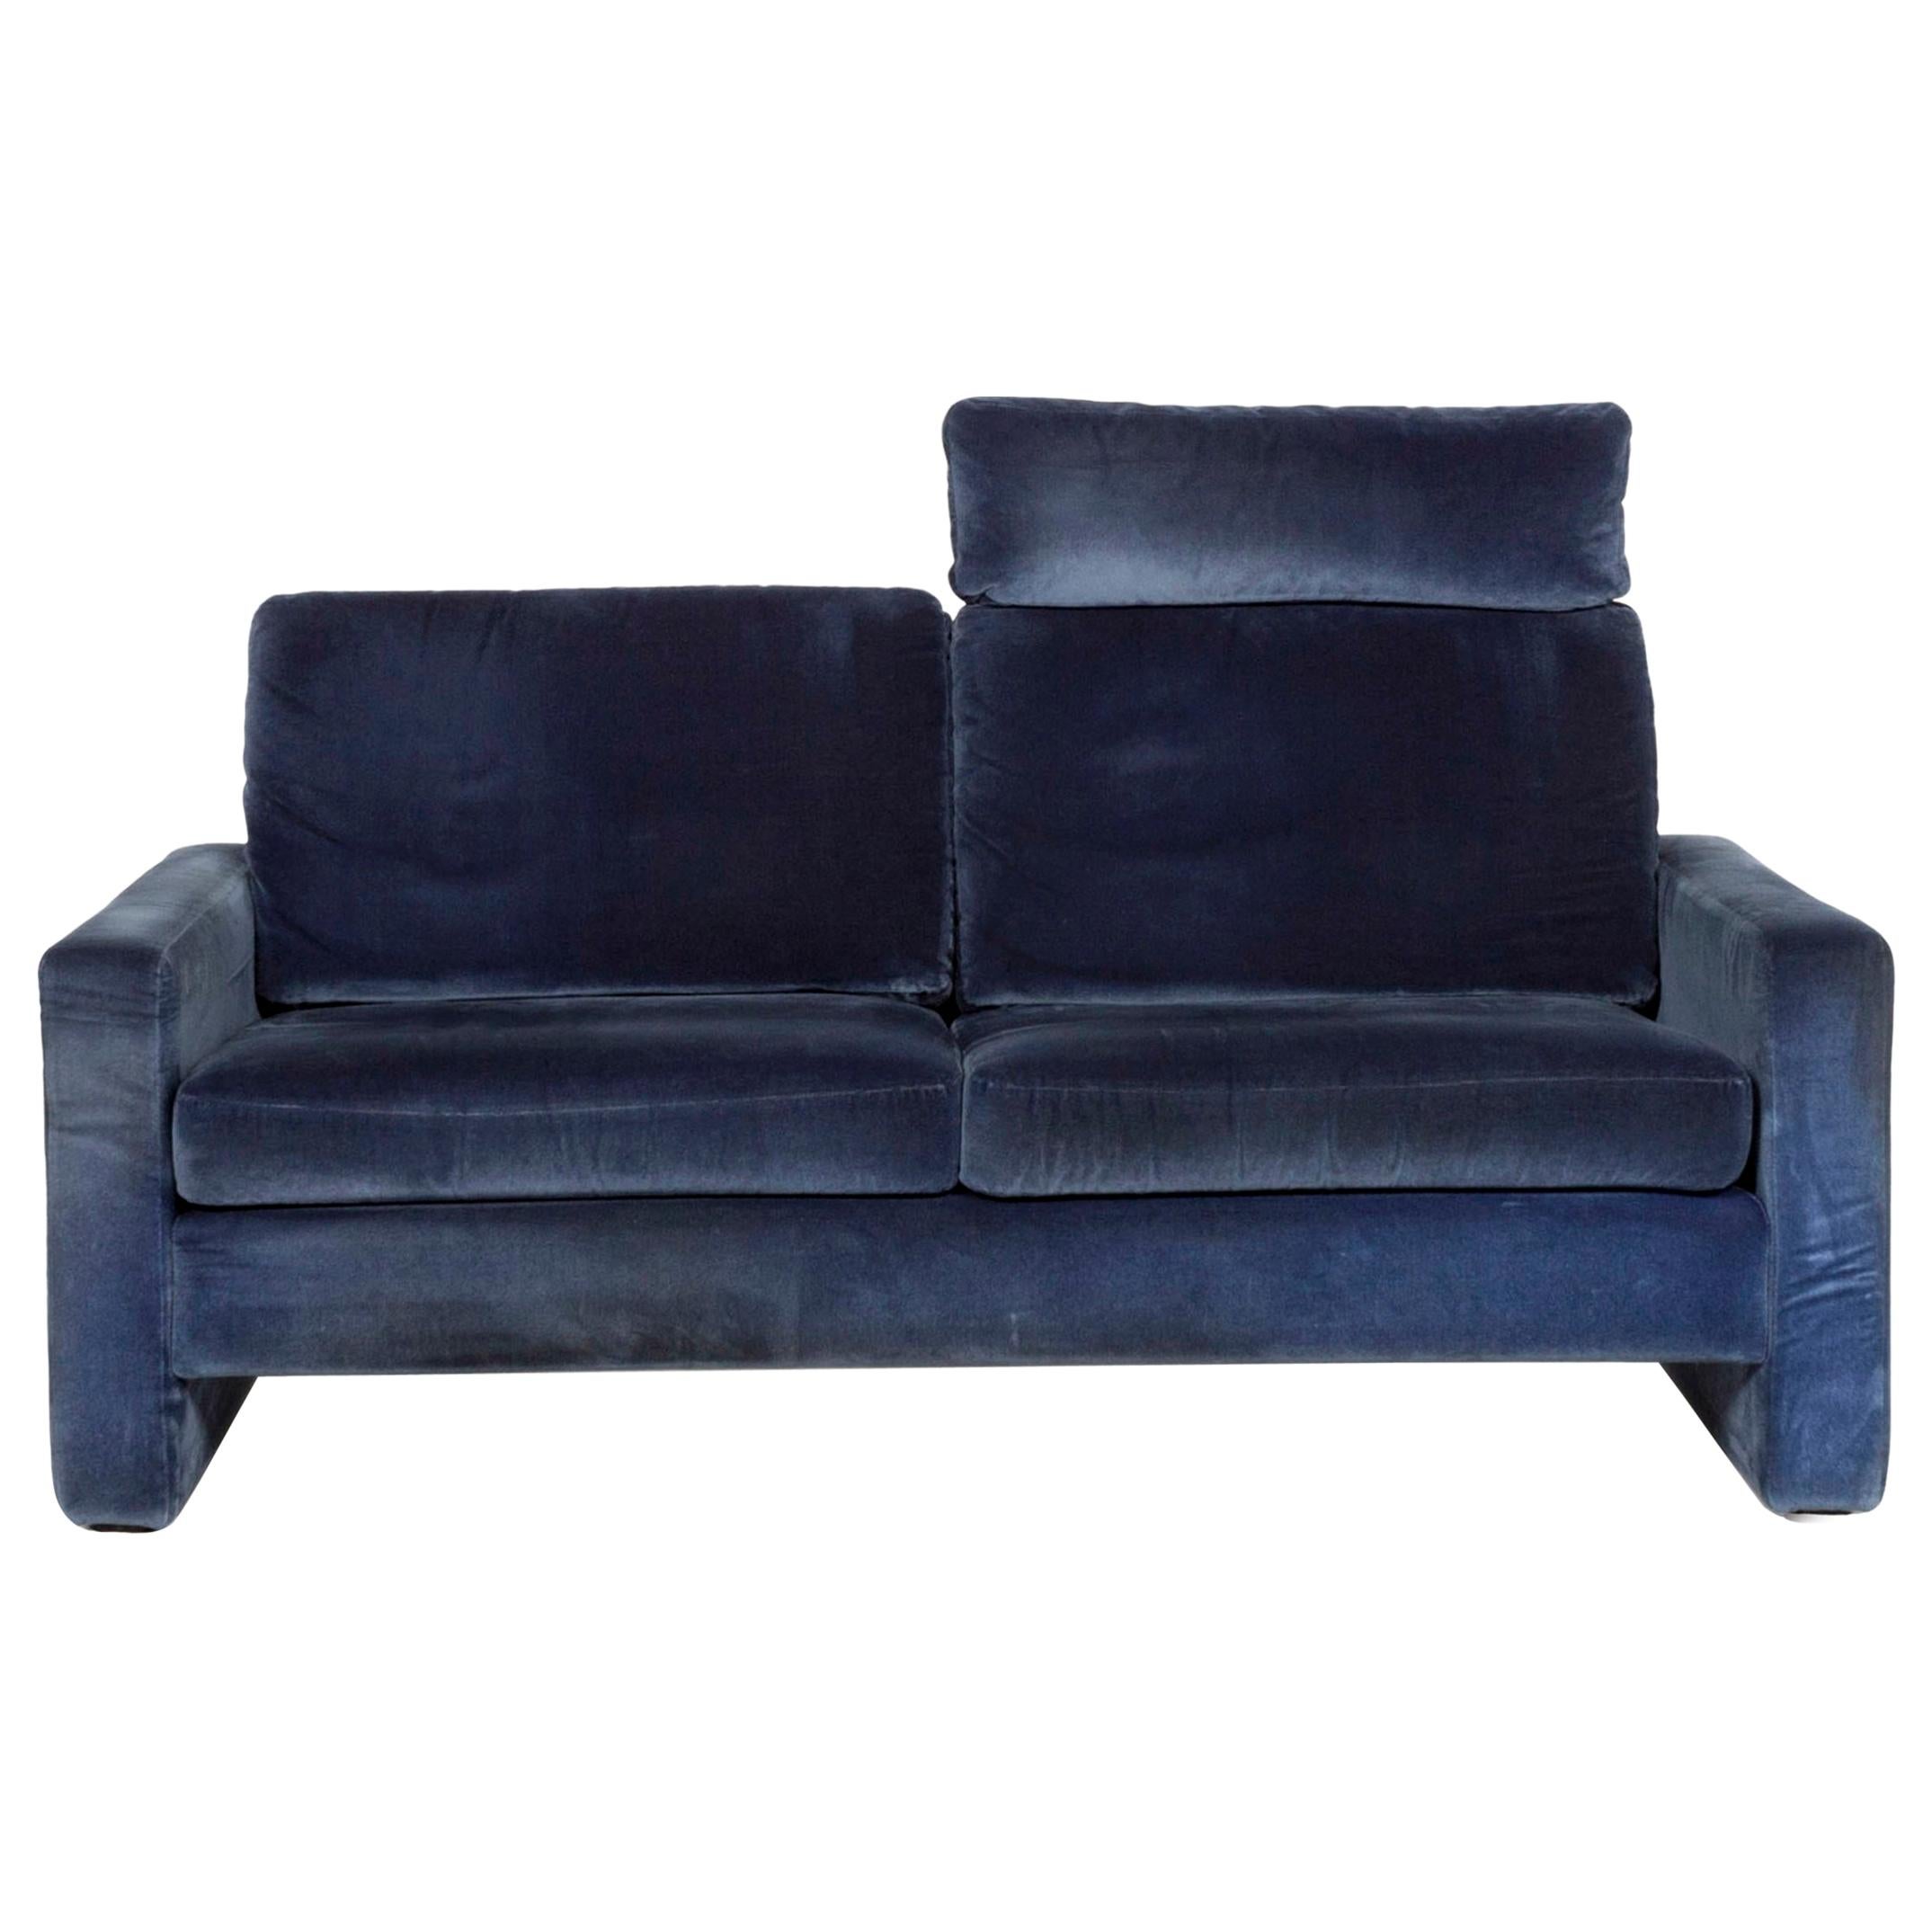 COR Conseta Fabric Sofa Blue Two-Seat Function Couch For Sale